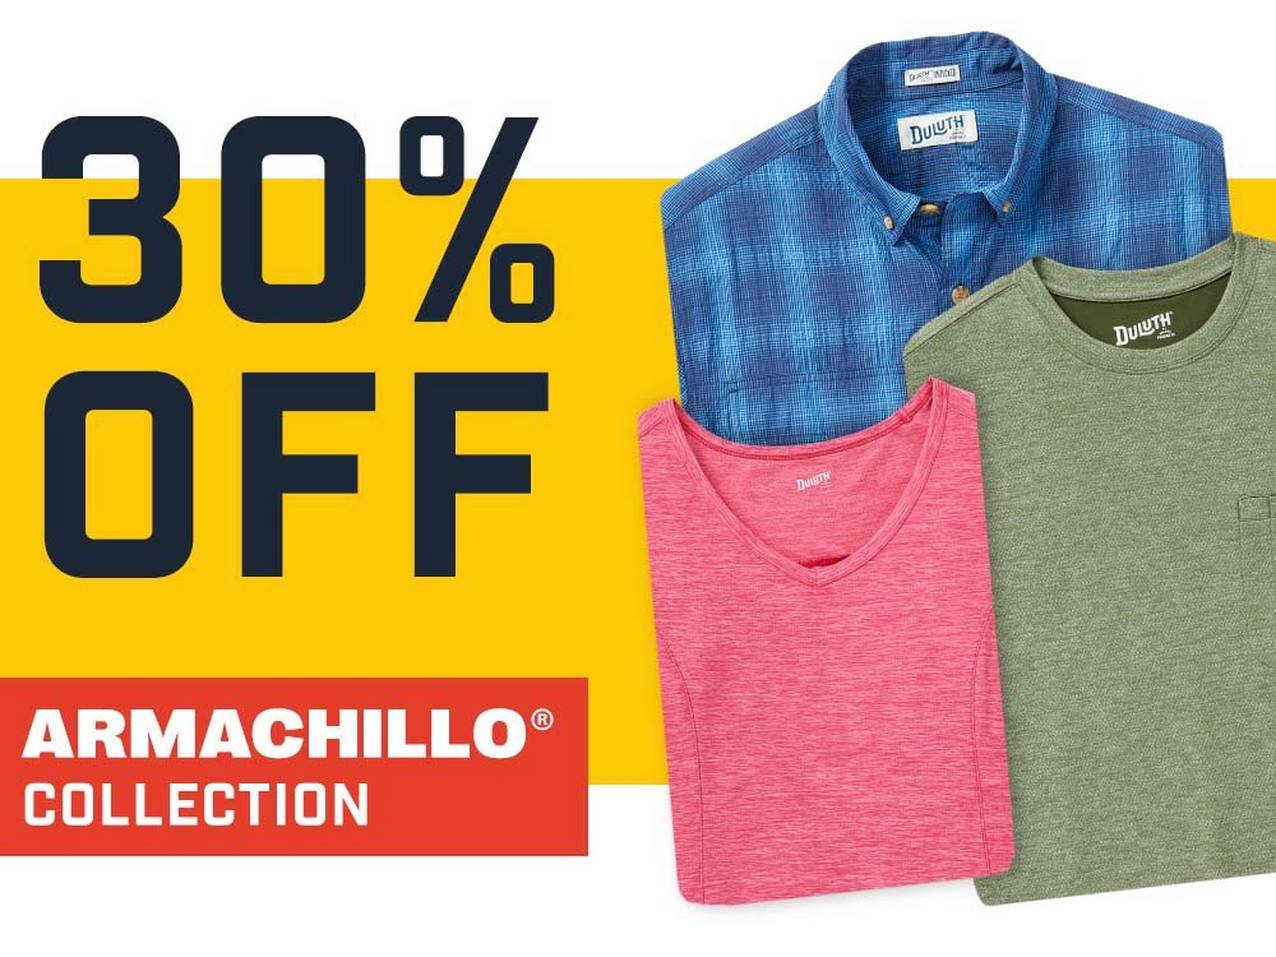 thirty percent off armachillo collection